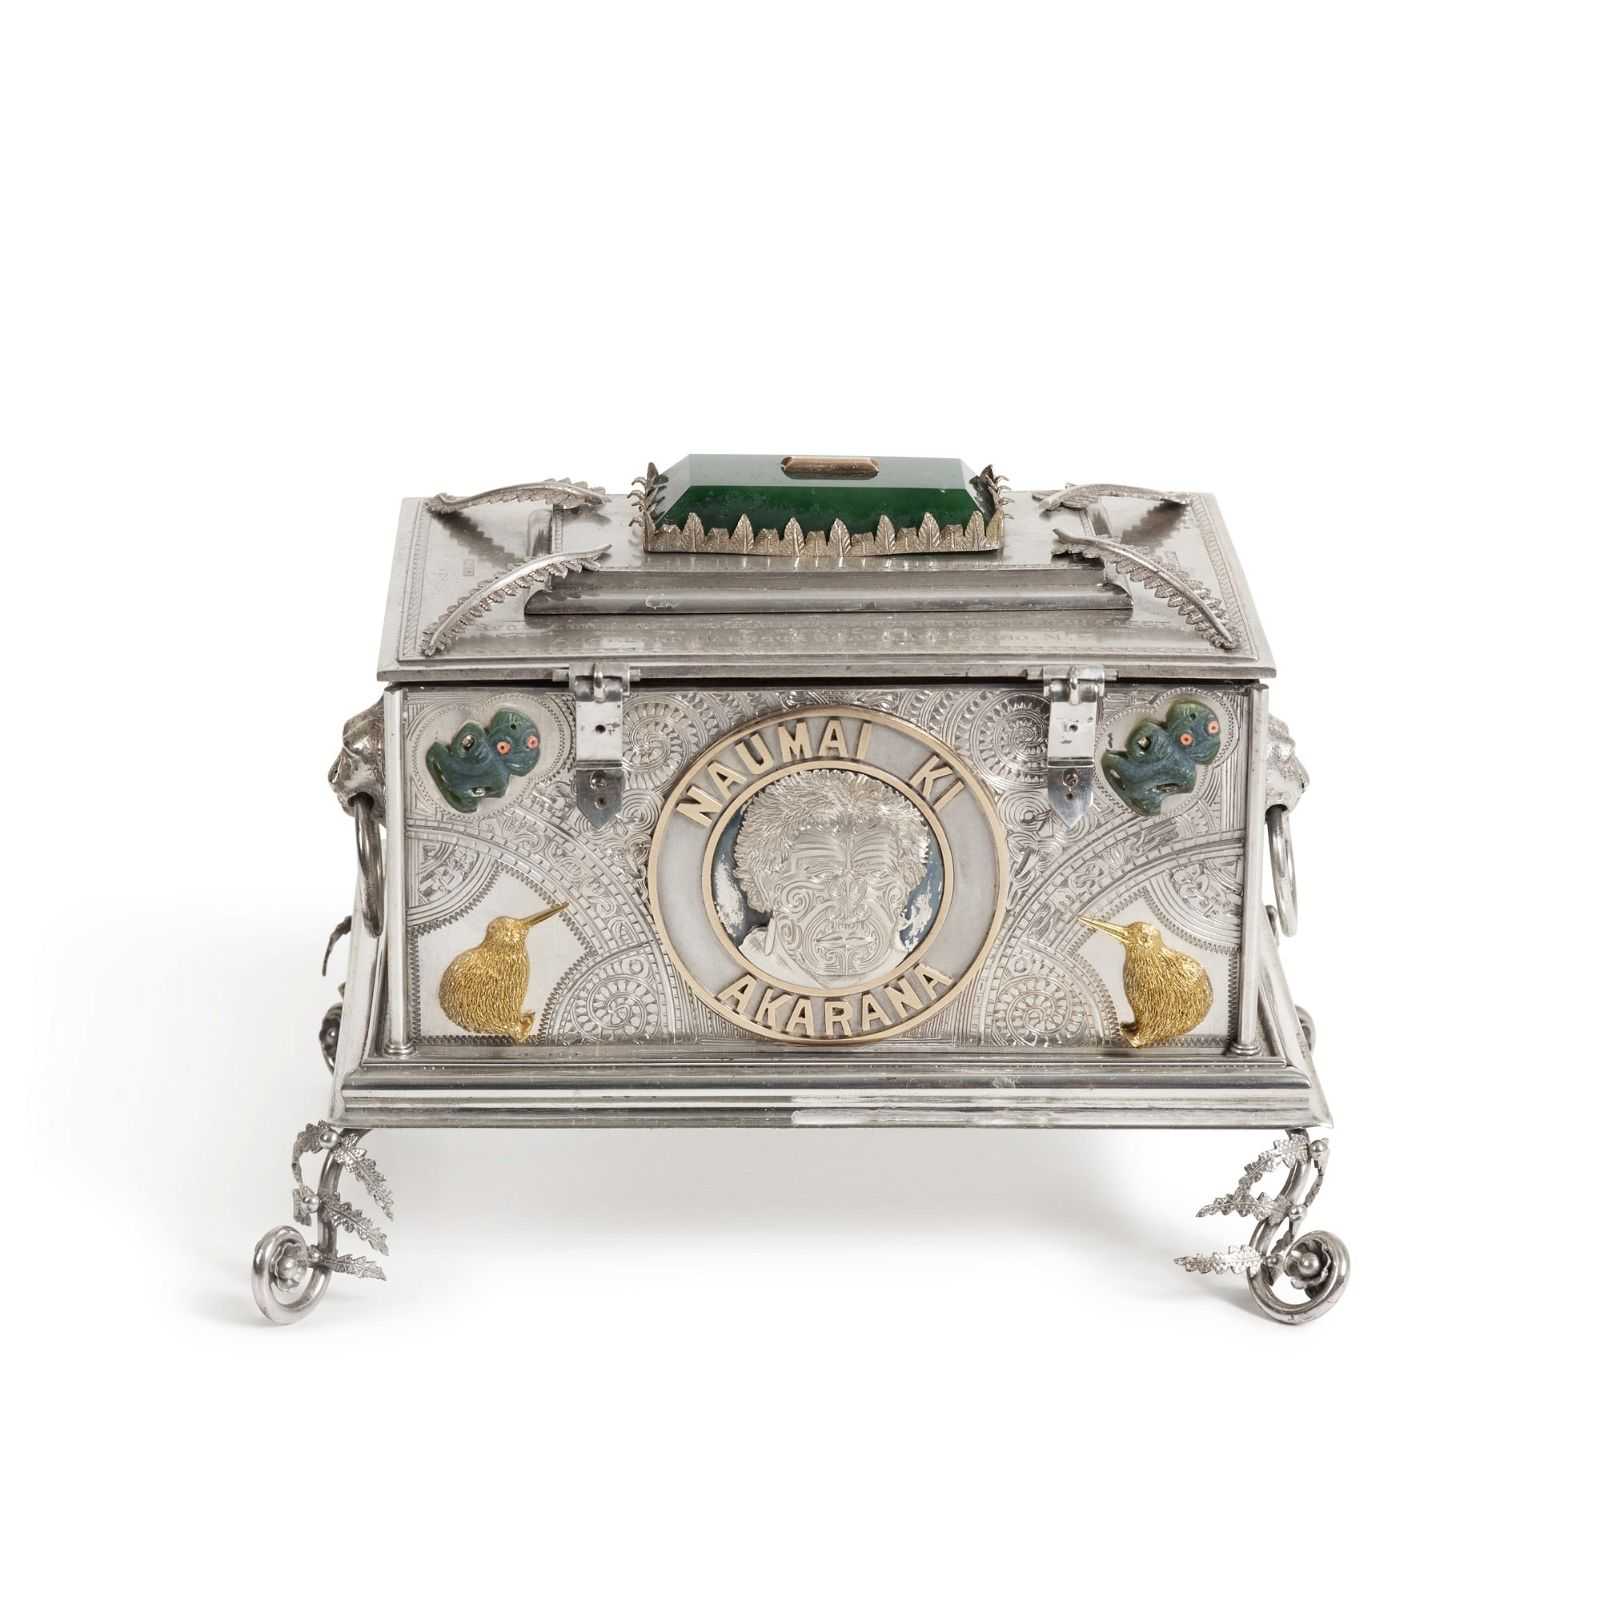 New Zealand silver, gold, and jade Arts and Crafts presentation casket, estimated at $10,000-$20,000 at Sotheby’s New York. 